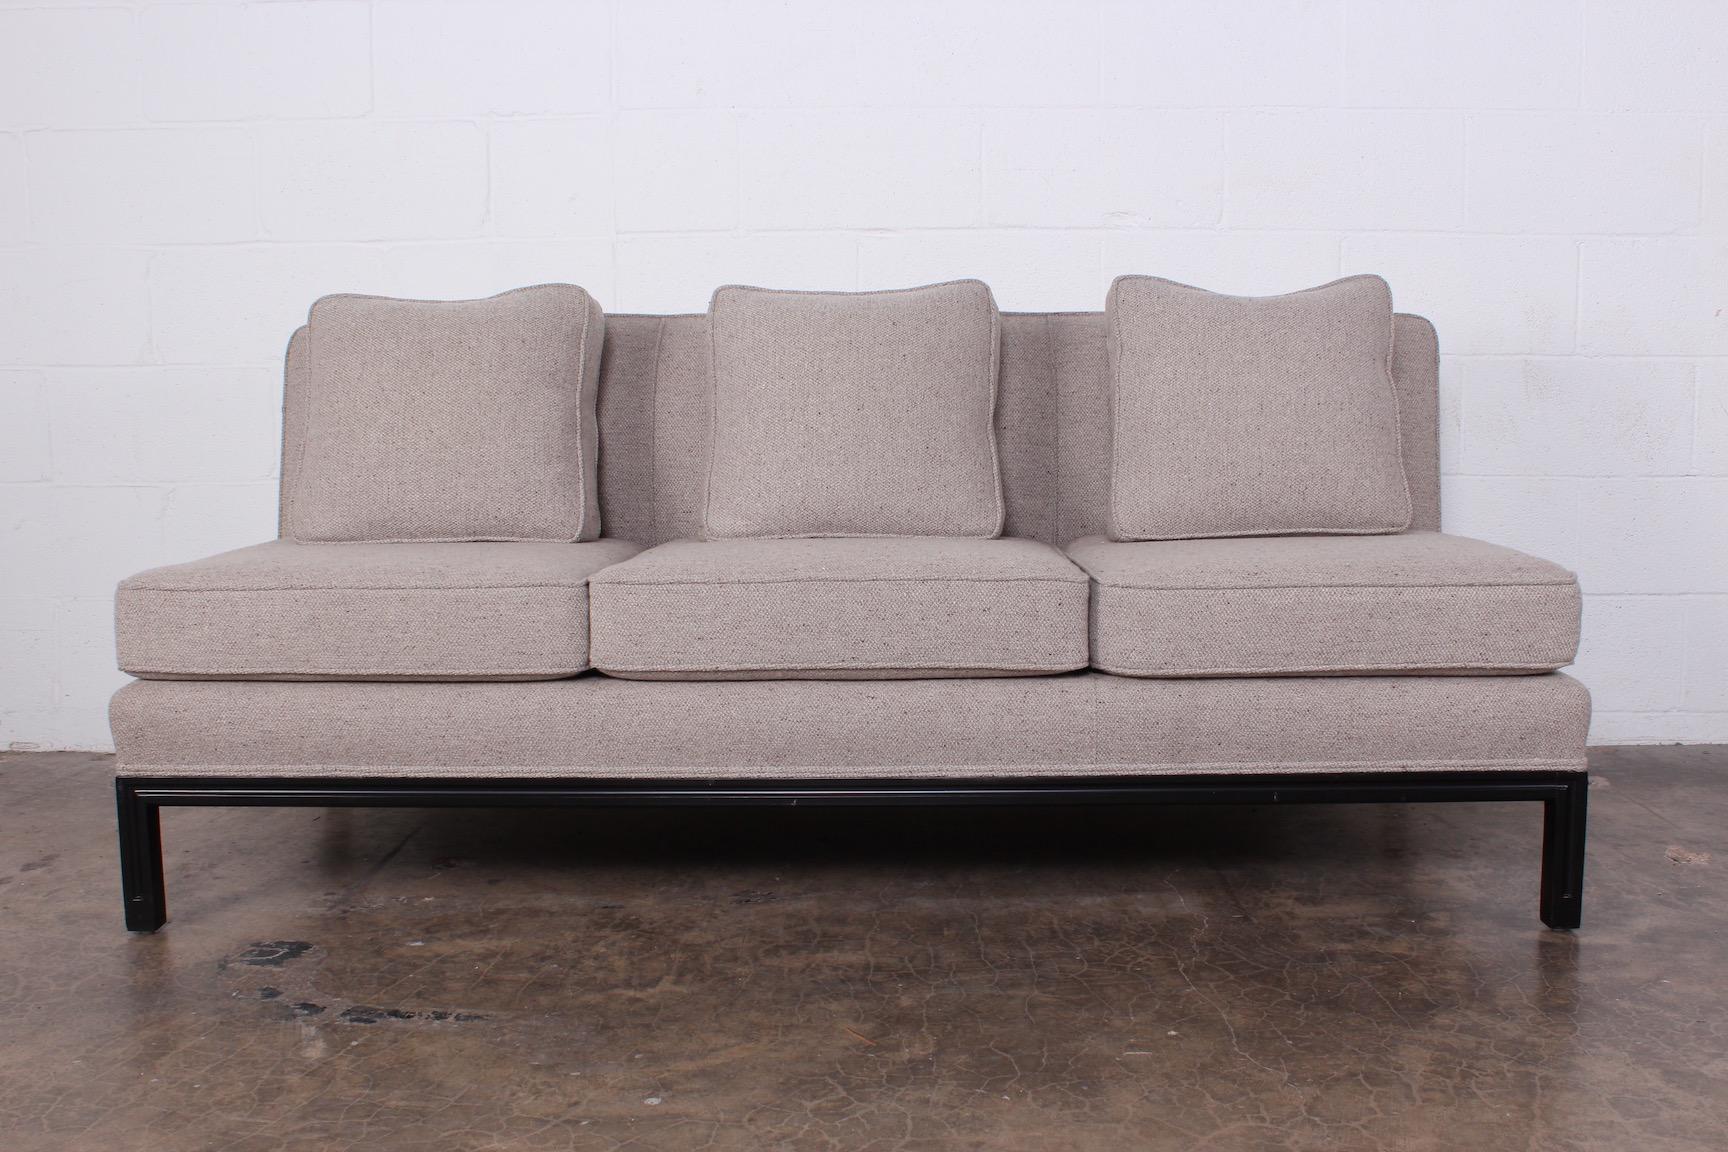 A two-piece sofa and chair designed by Tommi Parzinger for Parzinger Originals.
Measures: Sofa: 68 x 31 x 29 H
Chair: 26 x 31 x 29 H.